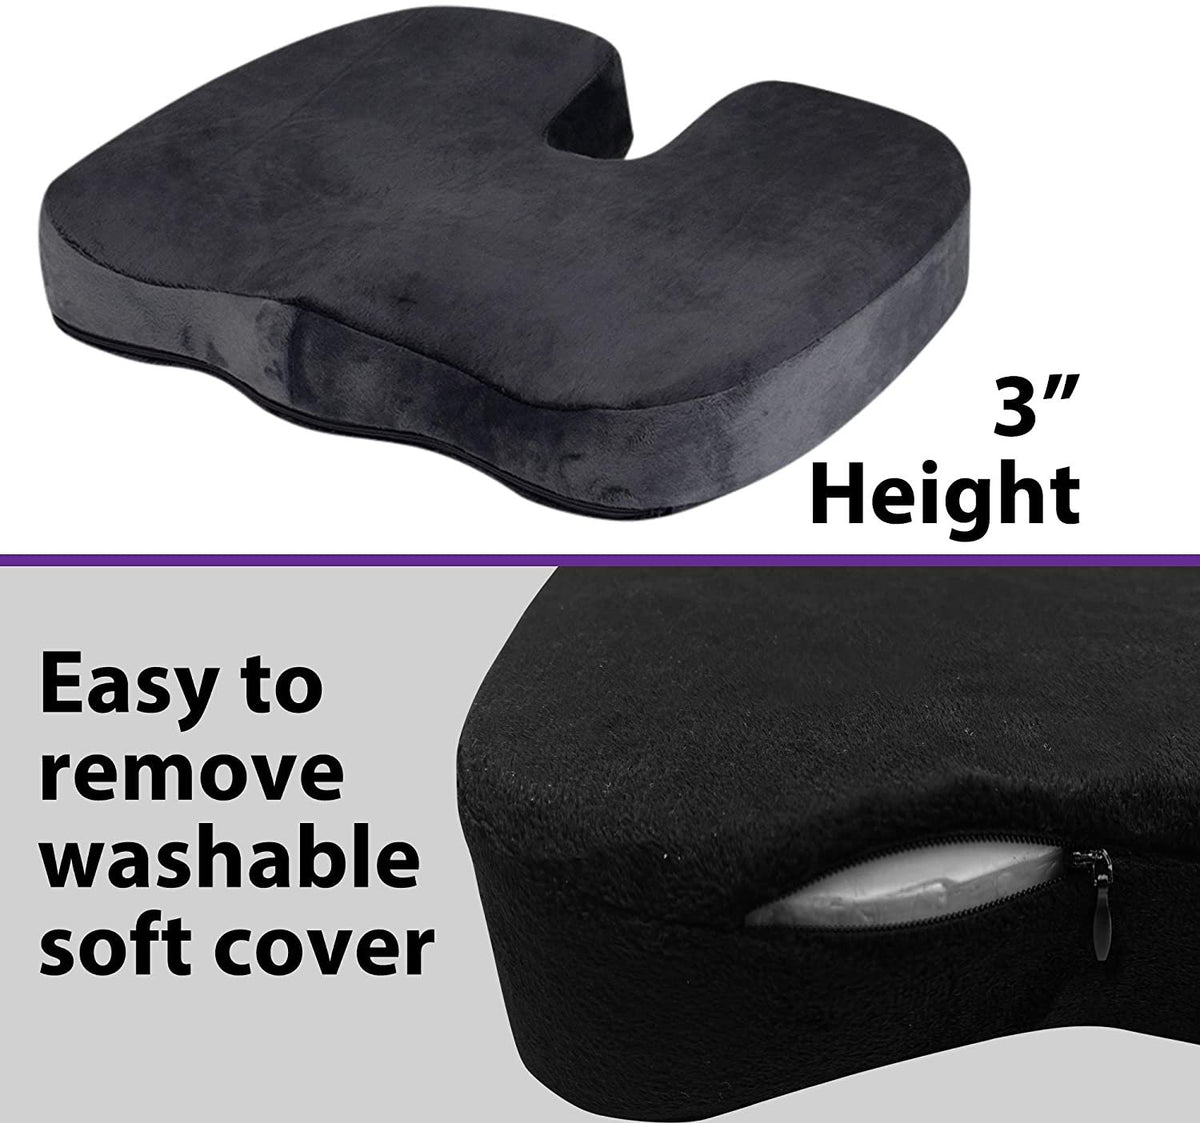 Mars Wellness Orthopedic Gel Memory Foam Coccyx Seat Cushion - Sciatica, Back Pain Relief, and Tailbone Pain - Soft Removable Cover - Mars Med Supply